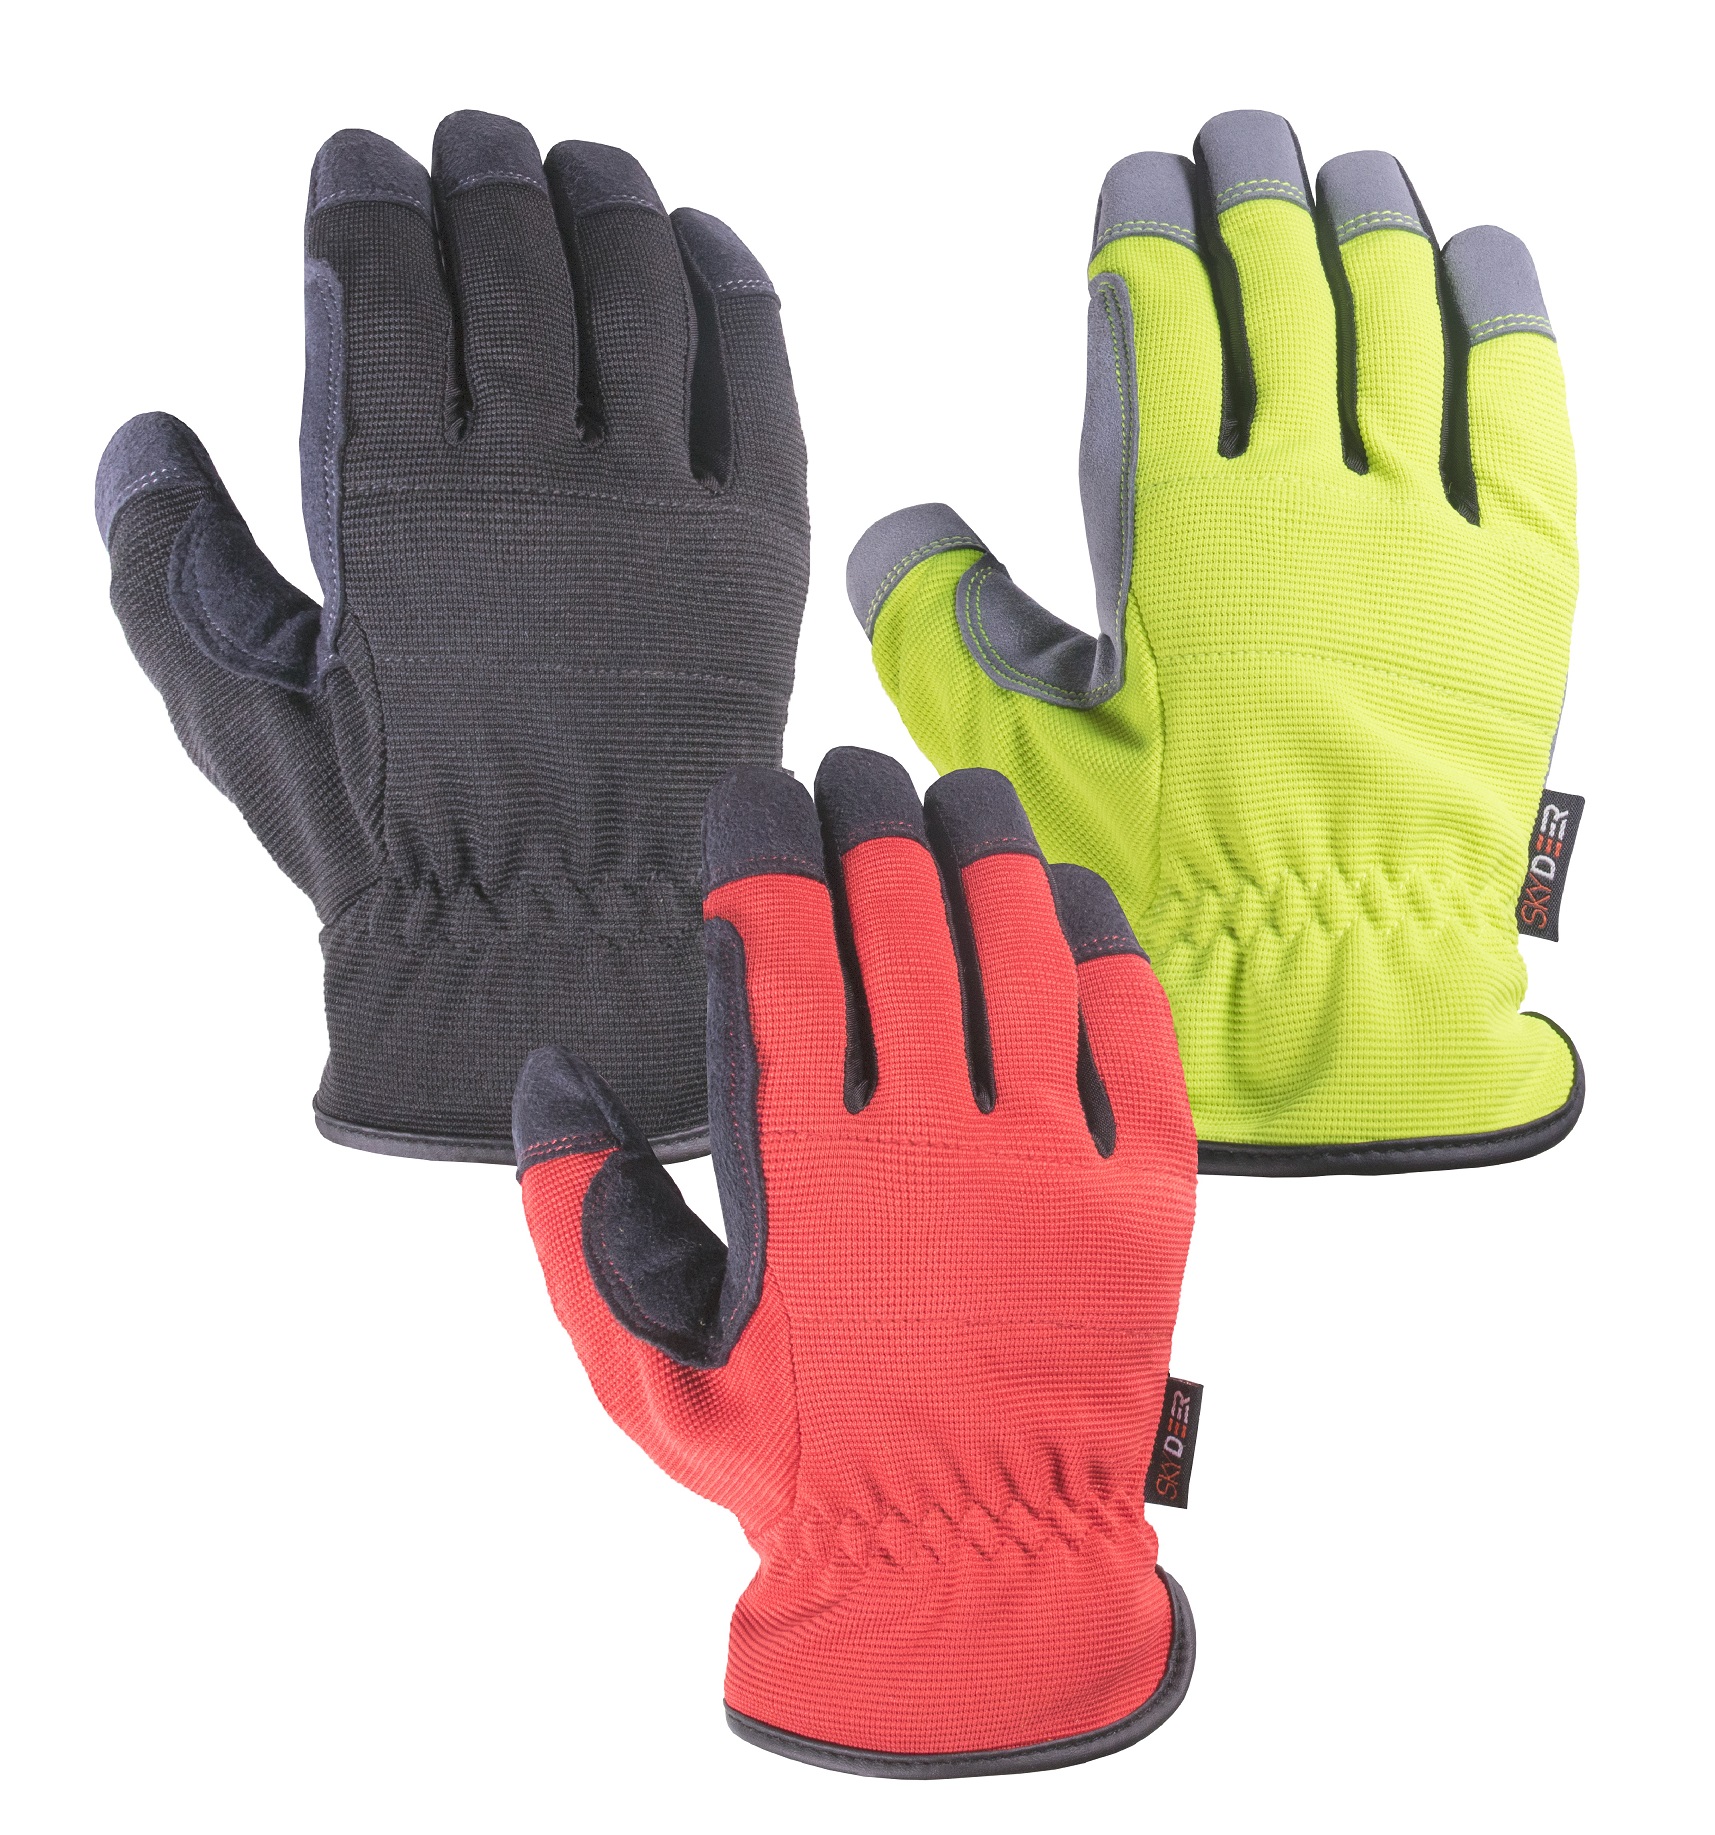 SKYDEER Armprotec Synthetic Leather WorkPRO Glove SD8810(L) (3